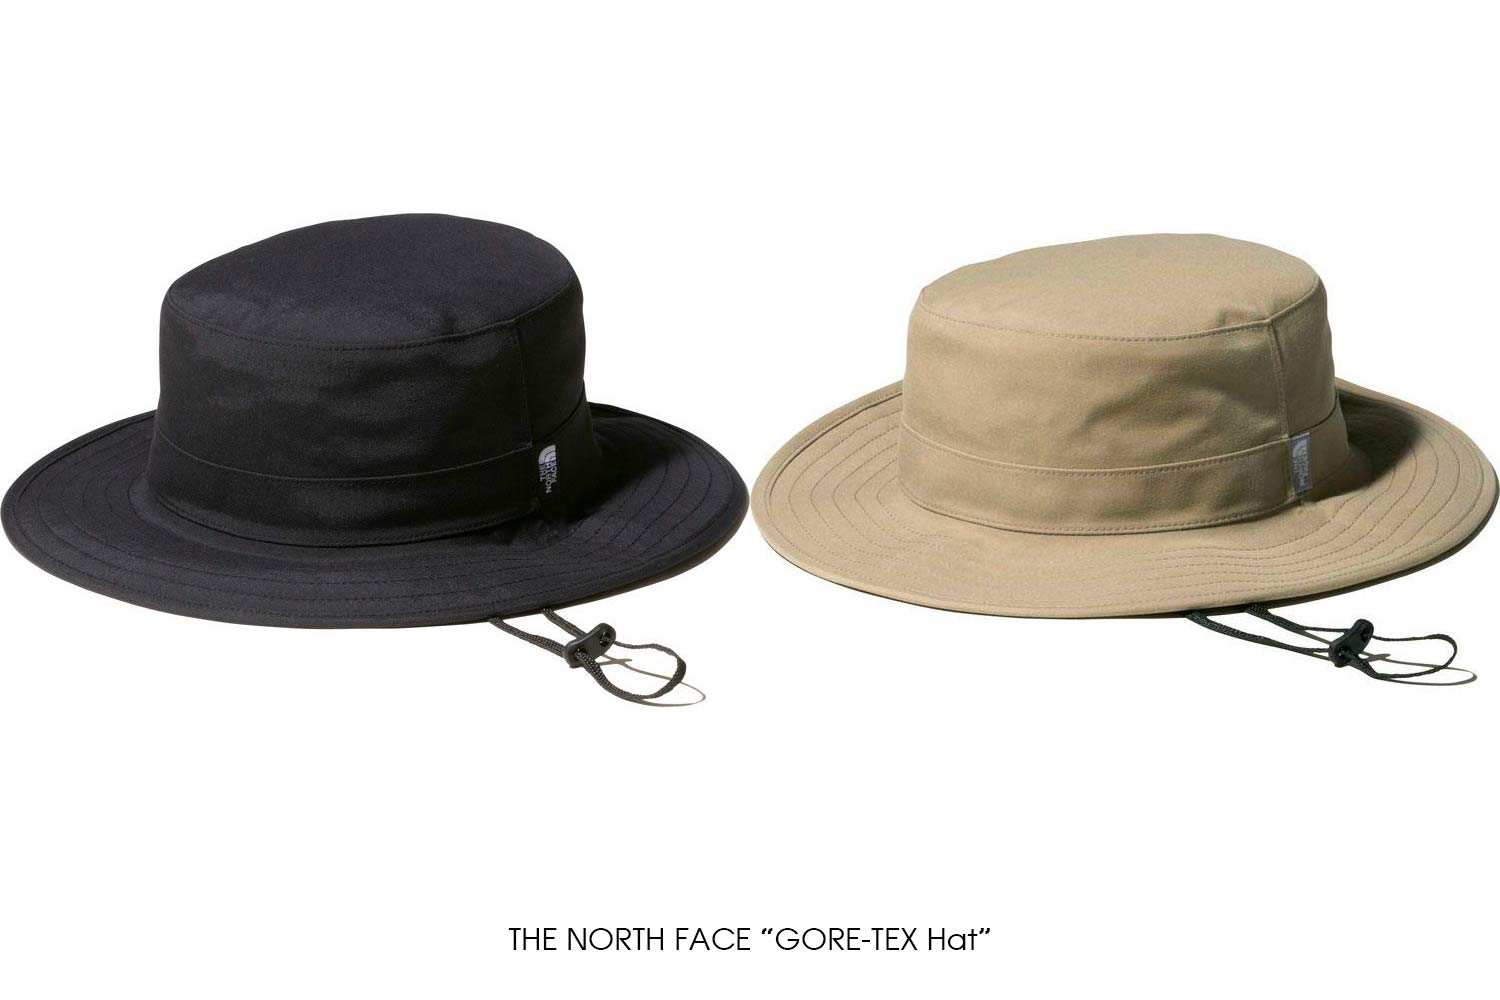 THE NORTH FACE "GORE-TEX Hat"